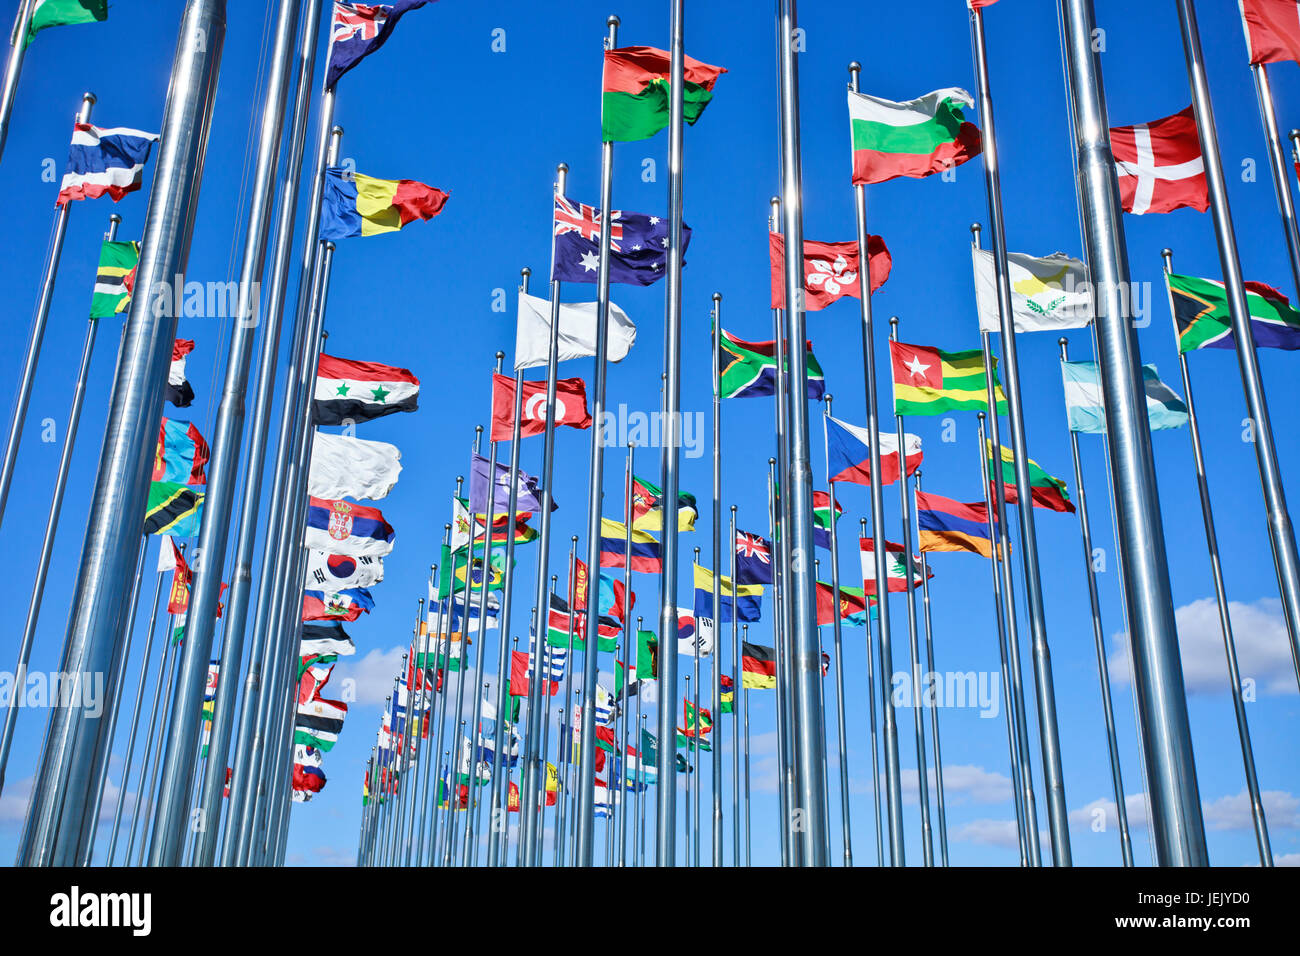 Collection of international flags against a blue sky Stock Photo